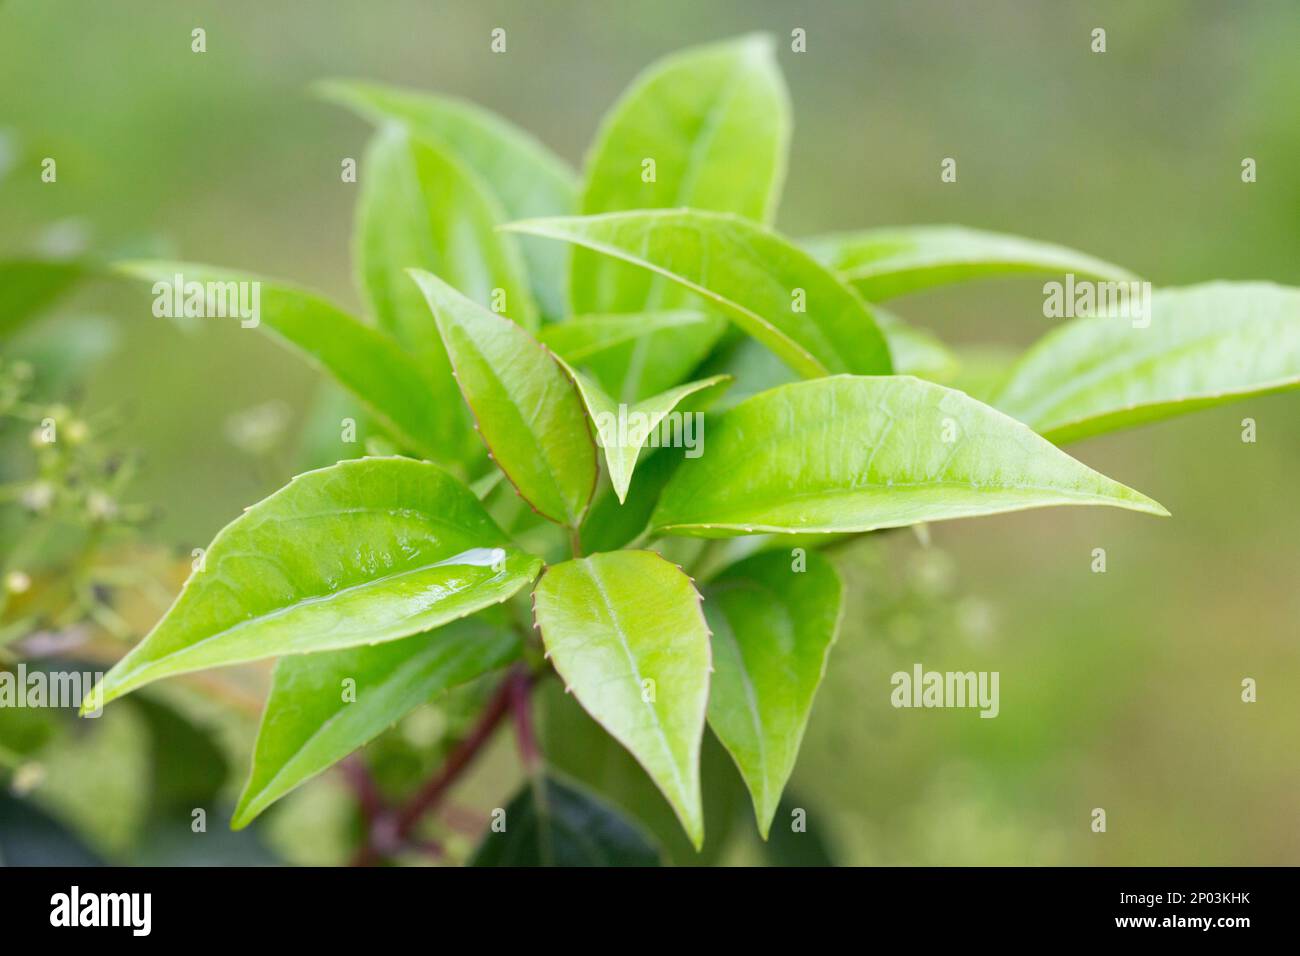 Leathery light green shiny leaves of Swamp Azalea plant, also called Clammy Azalea or Swamp Honeysuckle, latin name Rhododendron Viscosum, in summer a Stock Photo